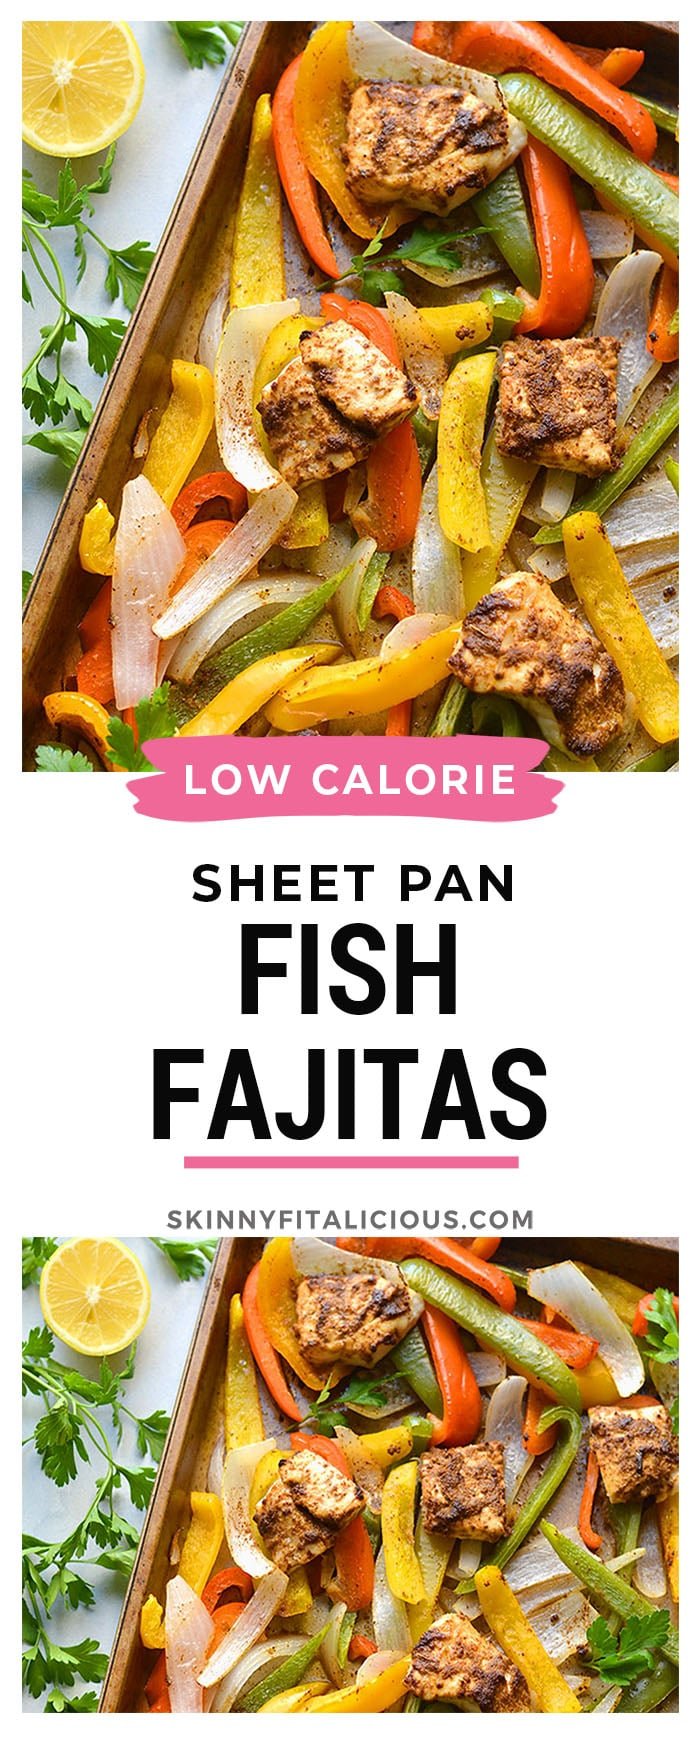 Healthy Sheet Pan Fish Fajitas! This dinner recipe is made in under 30 minutes with veggies and seasoned fish! An easy, healthy weeknight meal that's perfect for feeding a crowd or one. Paleo + Gluten Free + Low Calorie + Low Carb